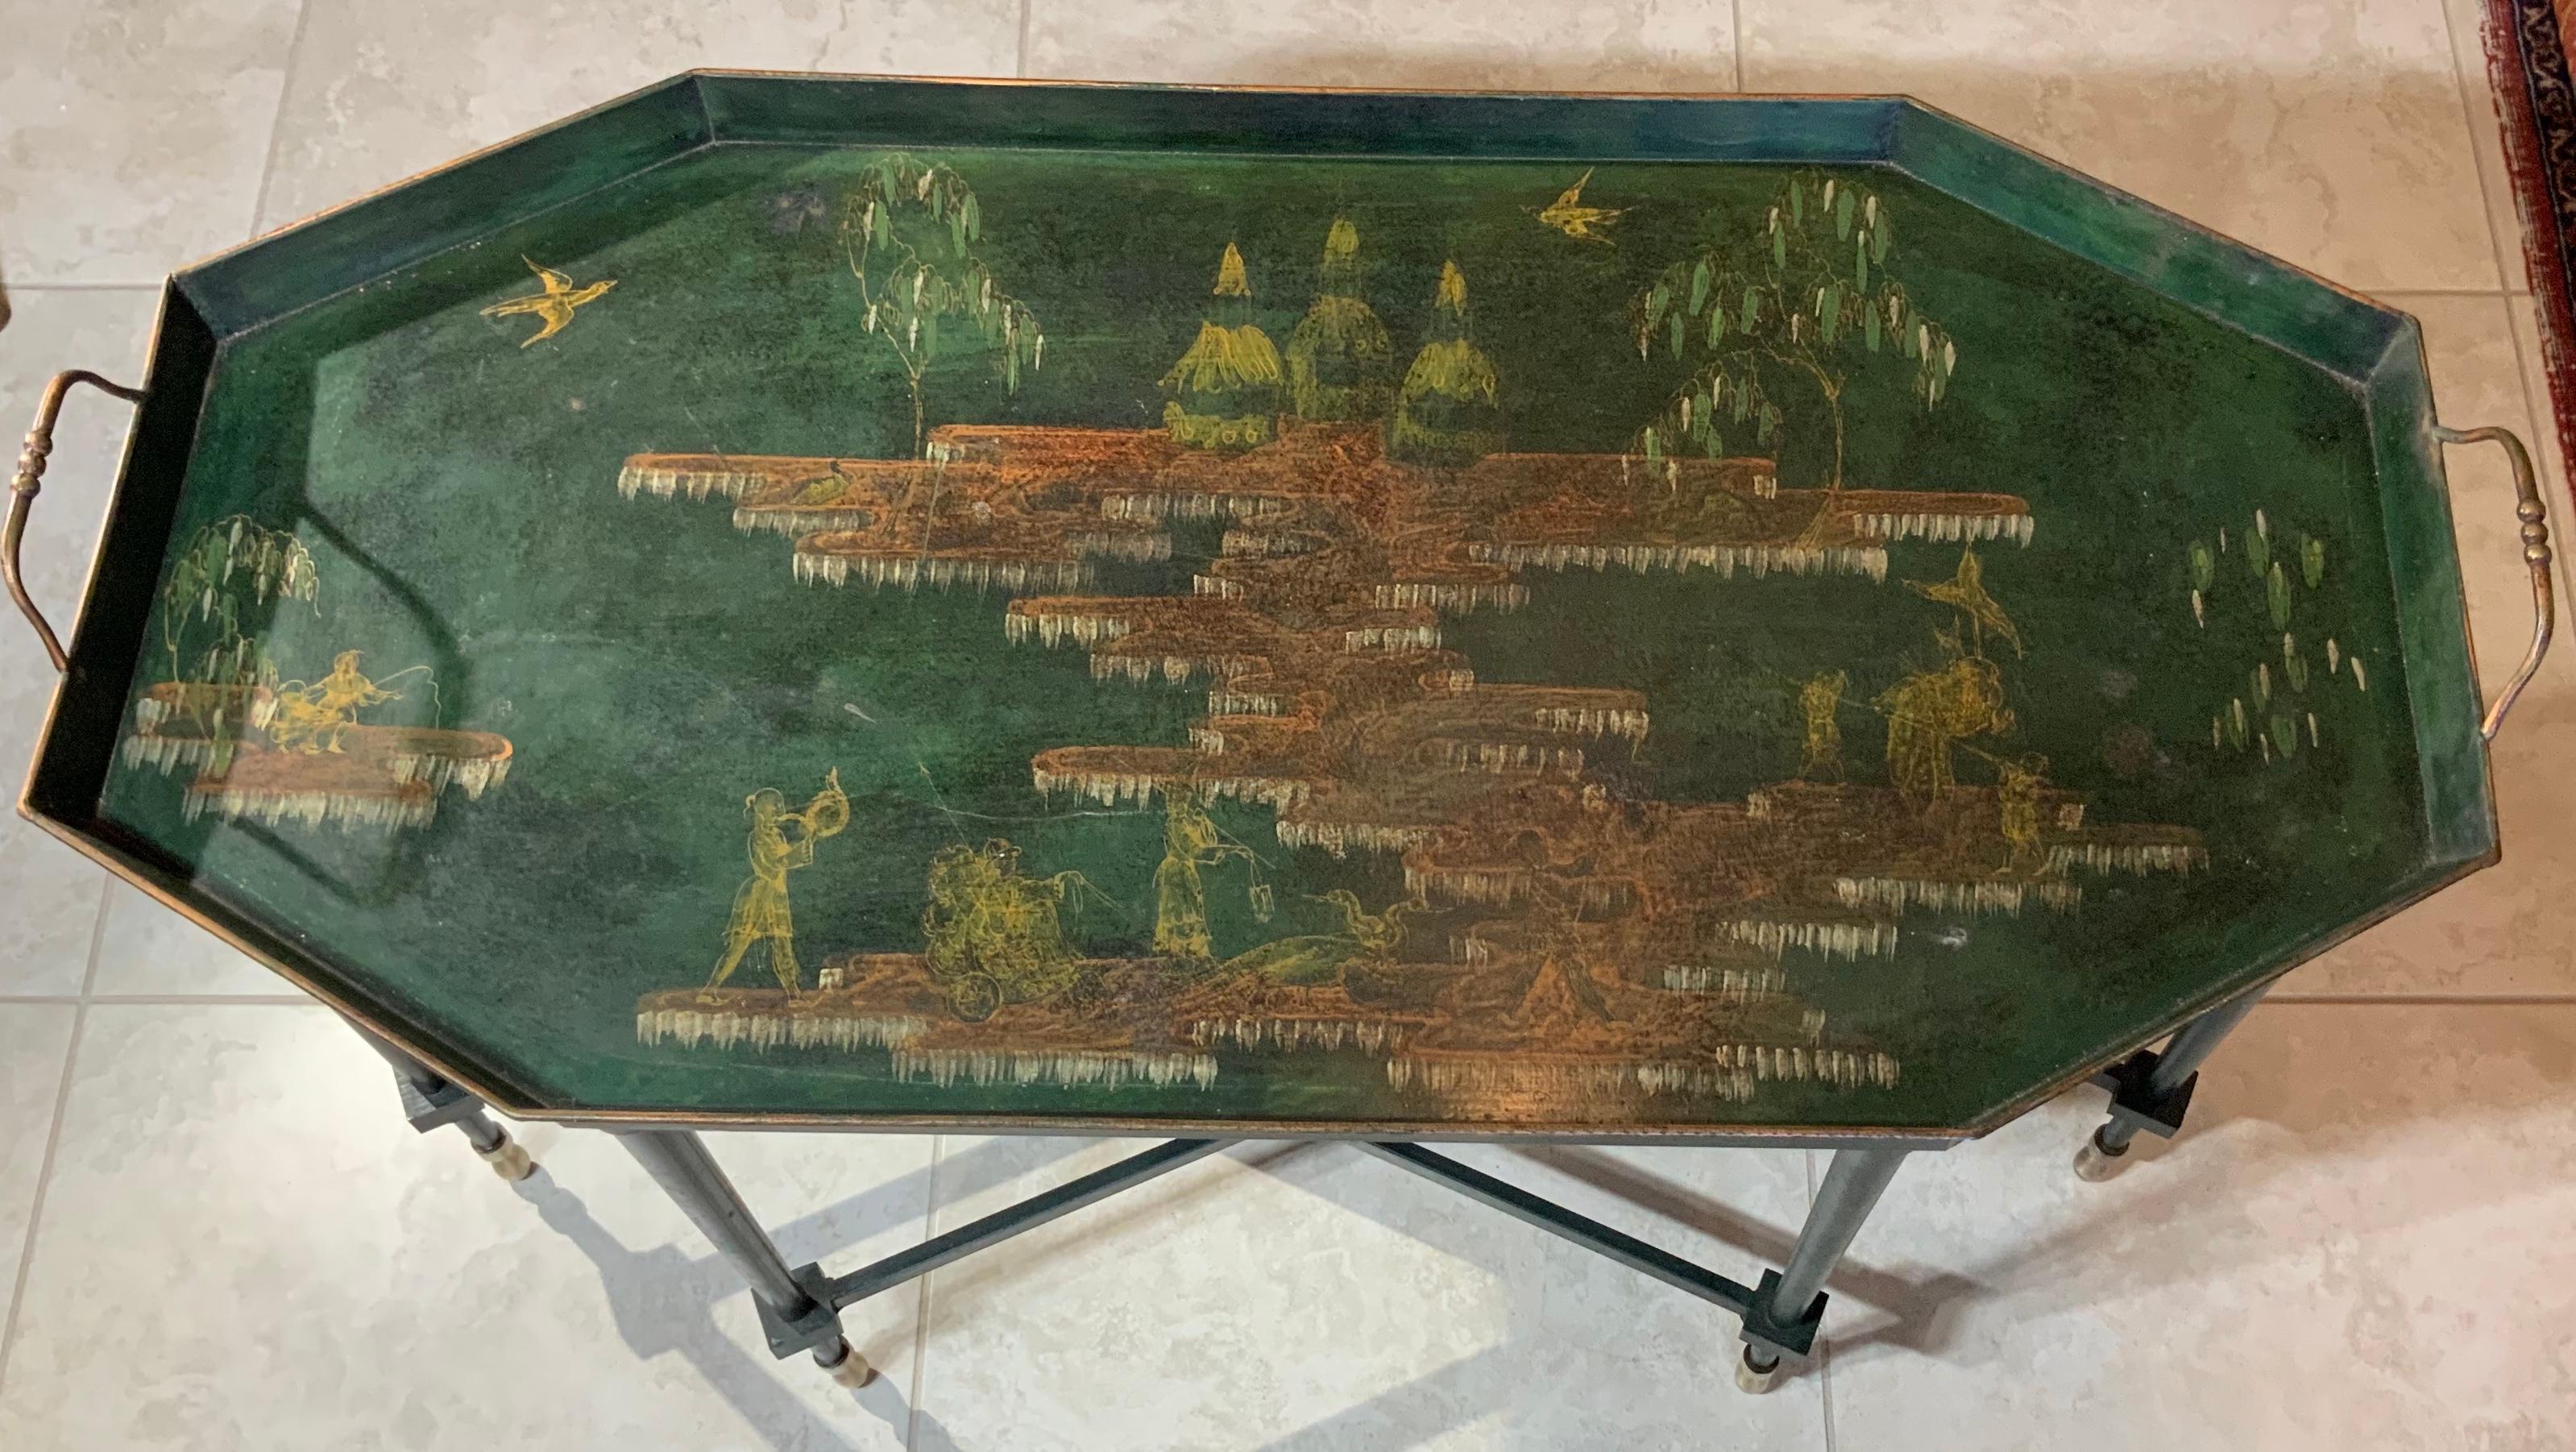 Italian chinoiserie tray table. Vintage Italian hand painted tole tray on custom made painted metal stand in rich green, gilt and gilt paint with Oriental dignitaries, pagodas, willows and cranes amidst gold -orang pools and meandering river. Very